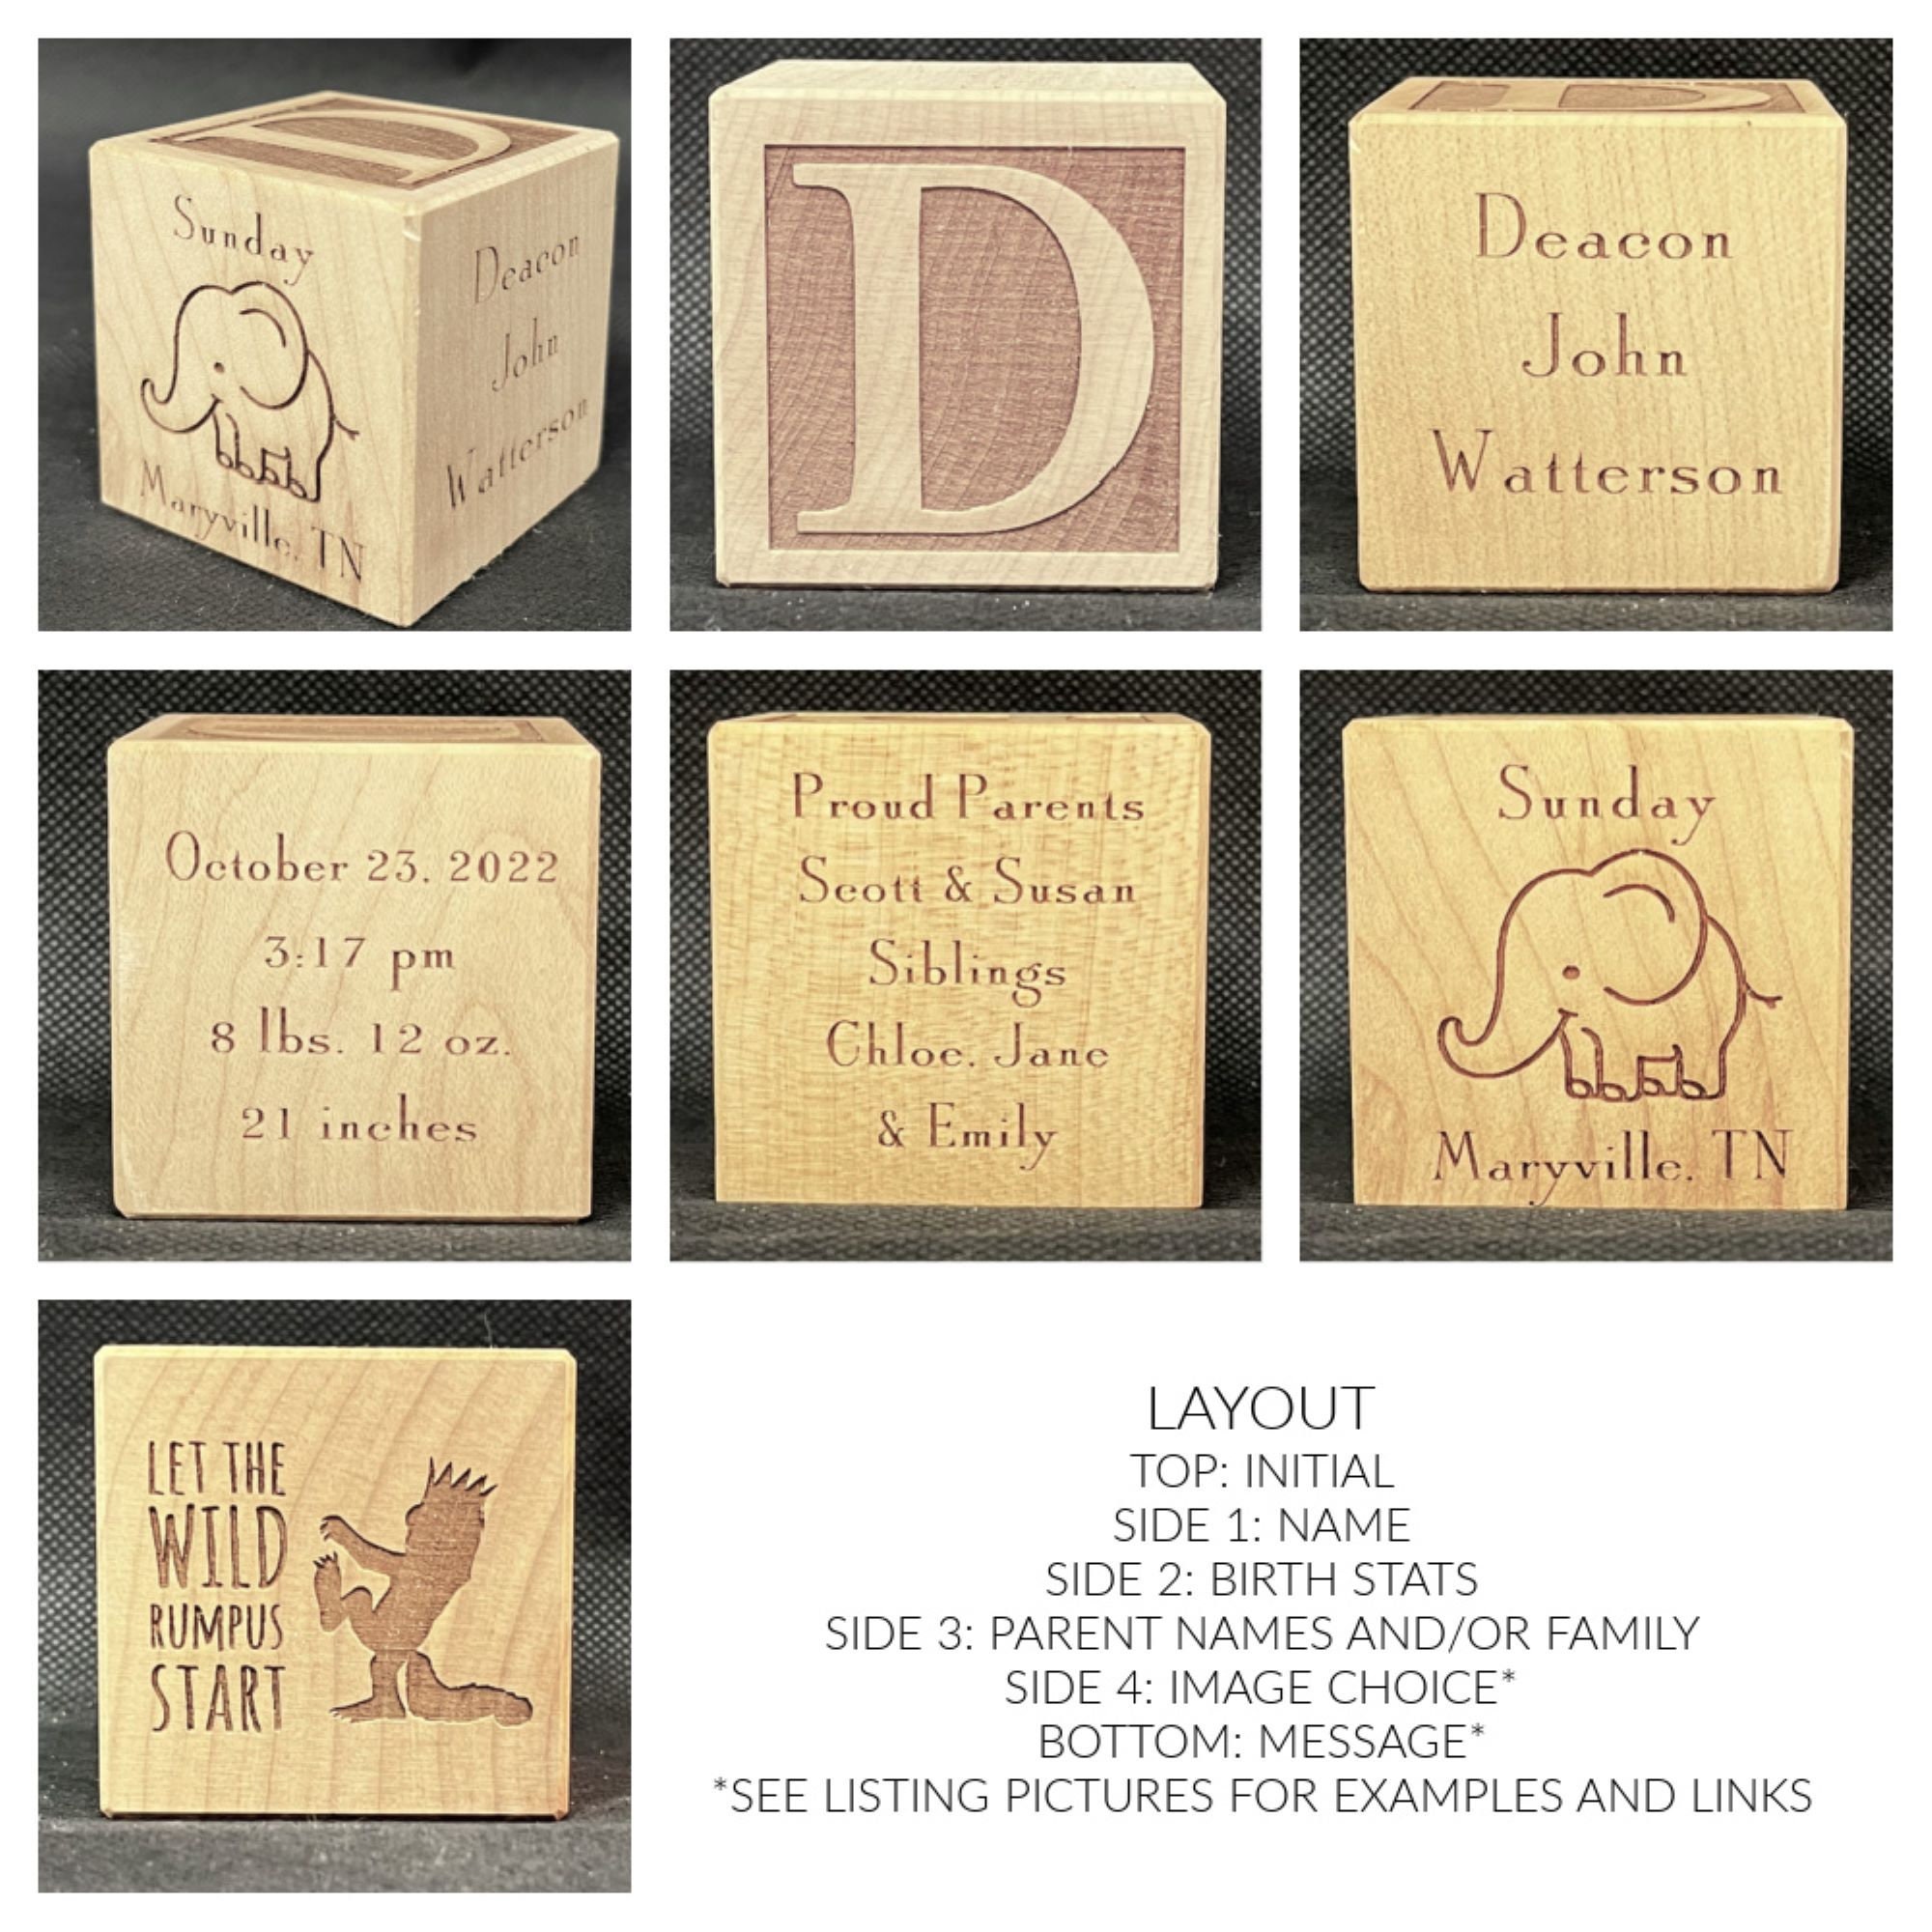 Personalized Baby Block - Craft-E-Family